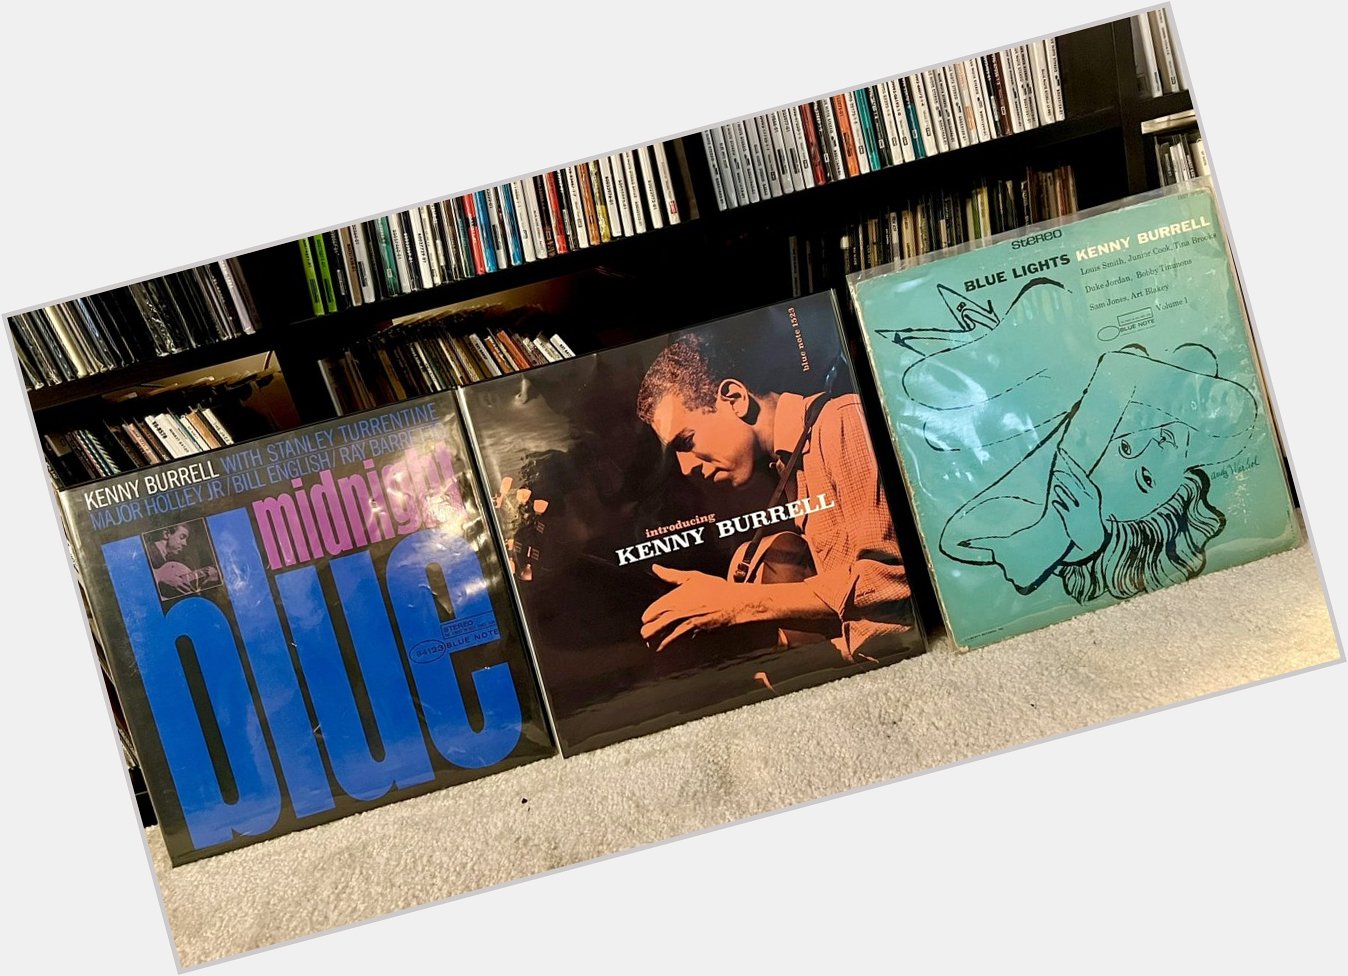 Wishing the great Kenny Burrell a Happy Birthday.  Which one would you listen to first?   